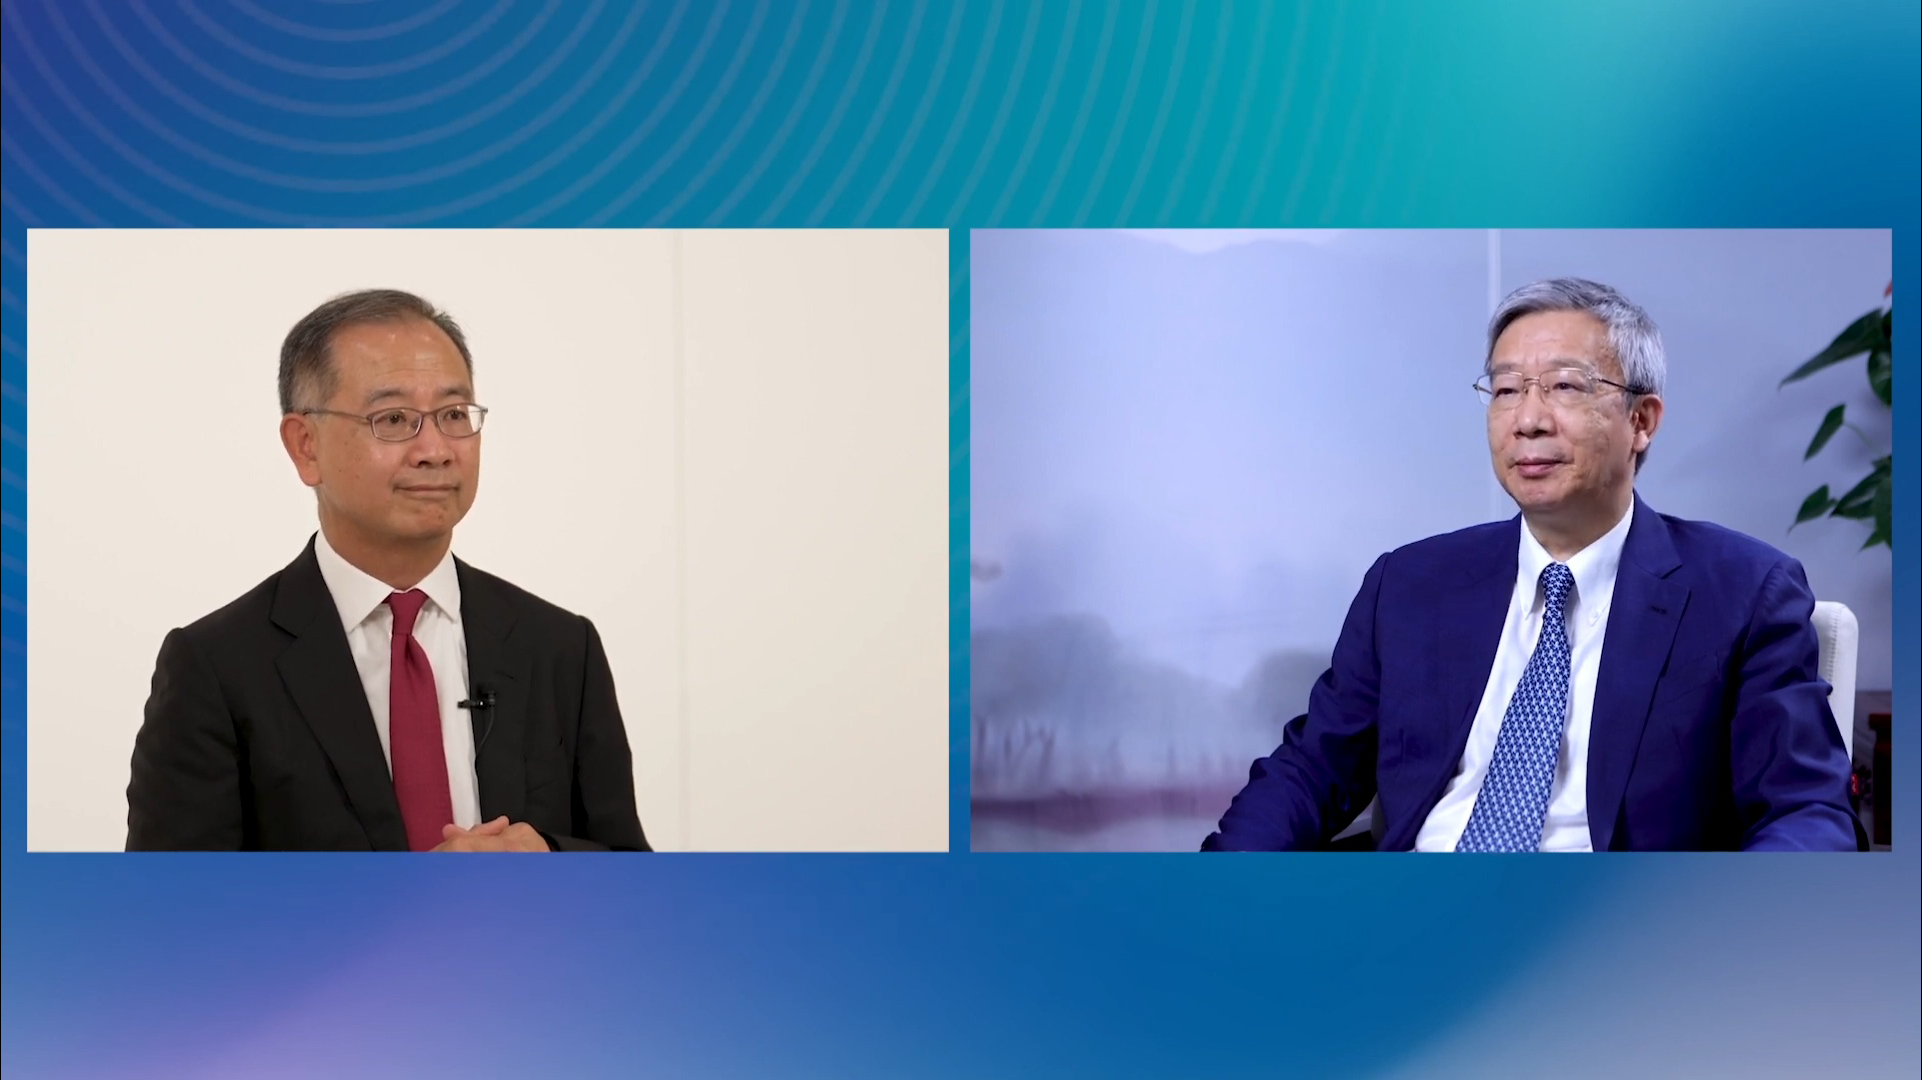 (From left to right) Eddie Yue, Chief Executive of Hong Kong Monetary Authority; YI Gang, Governor of the People’s Bank of China